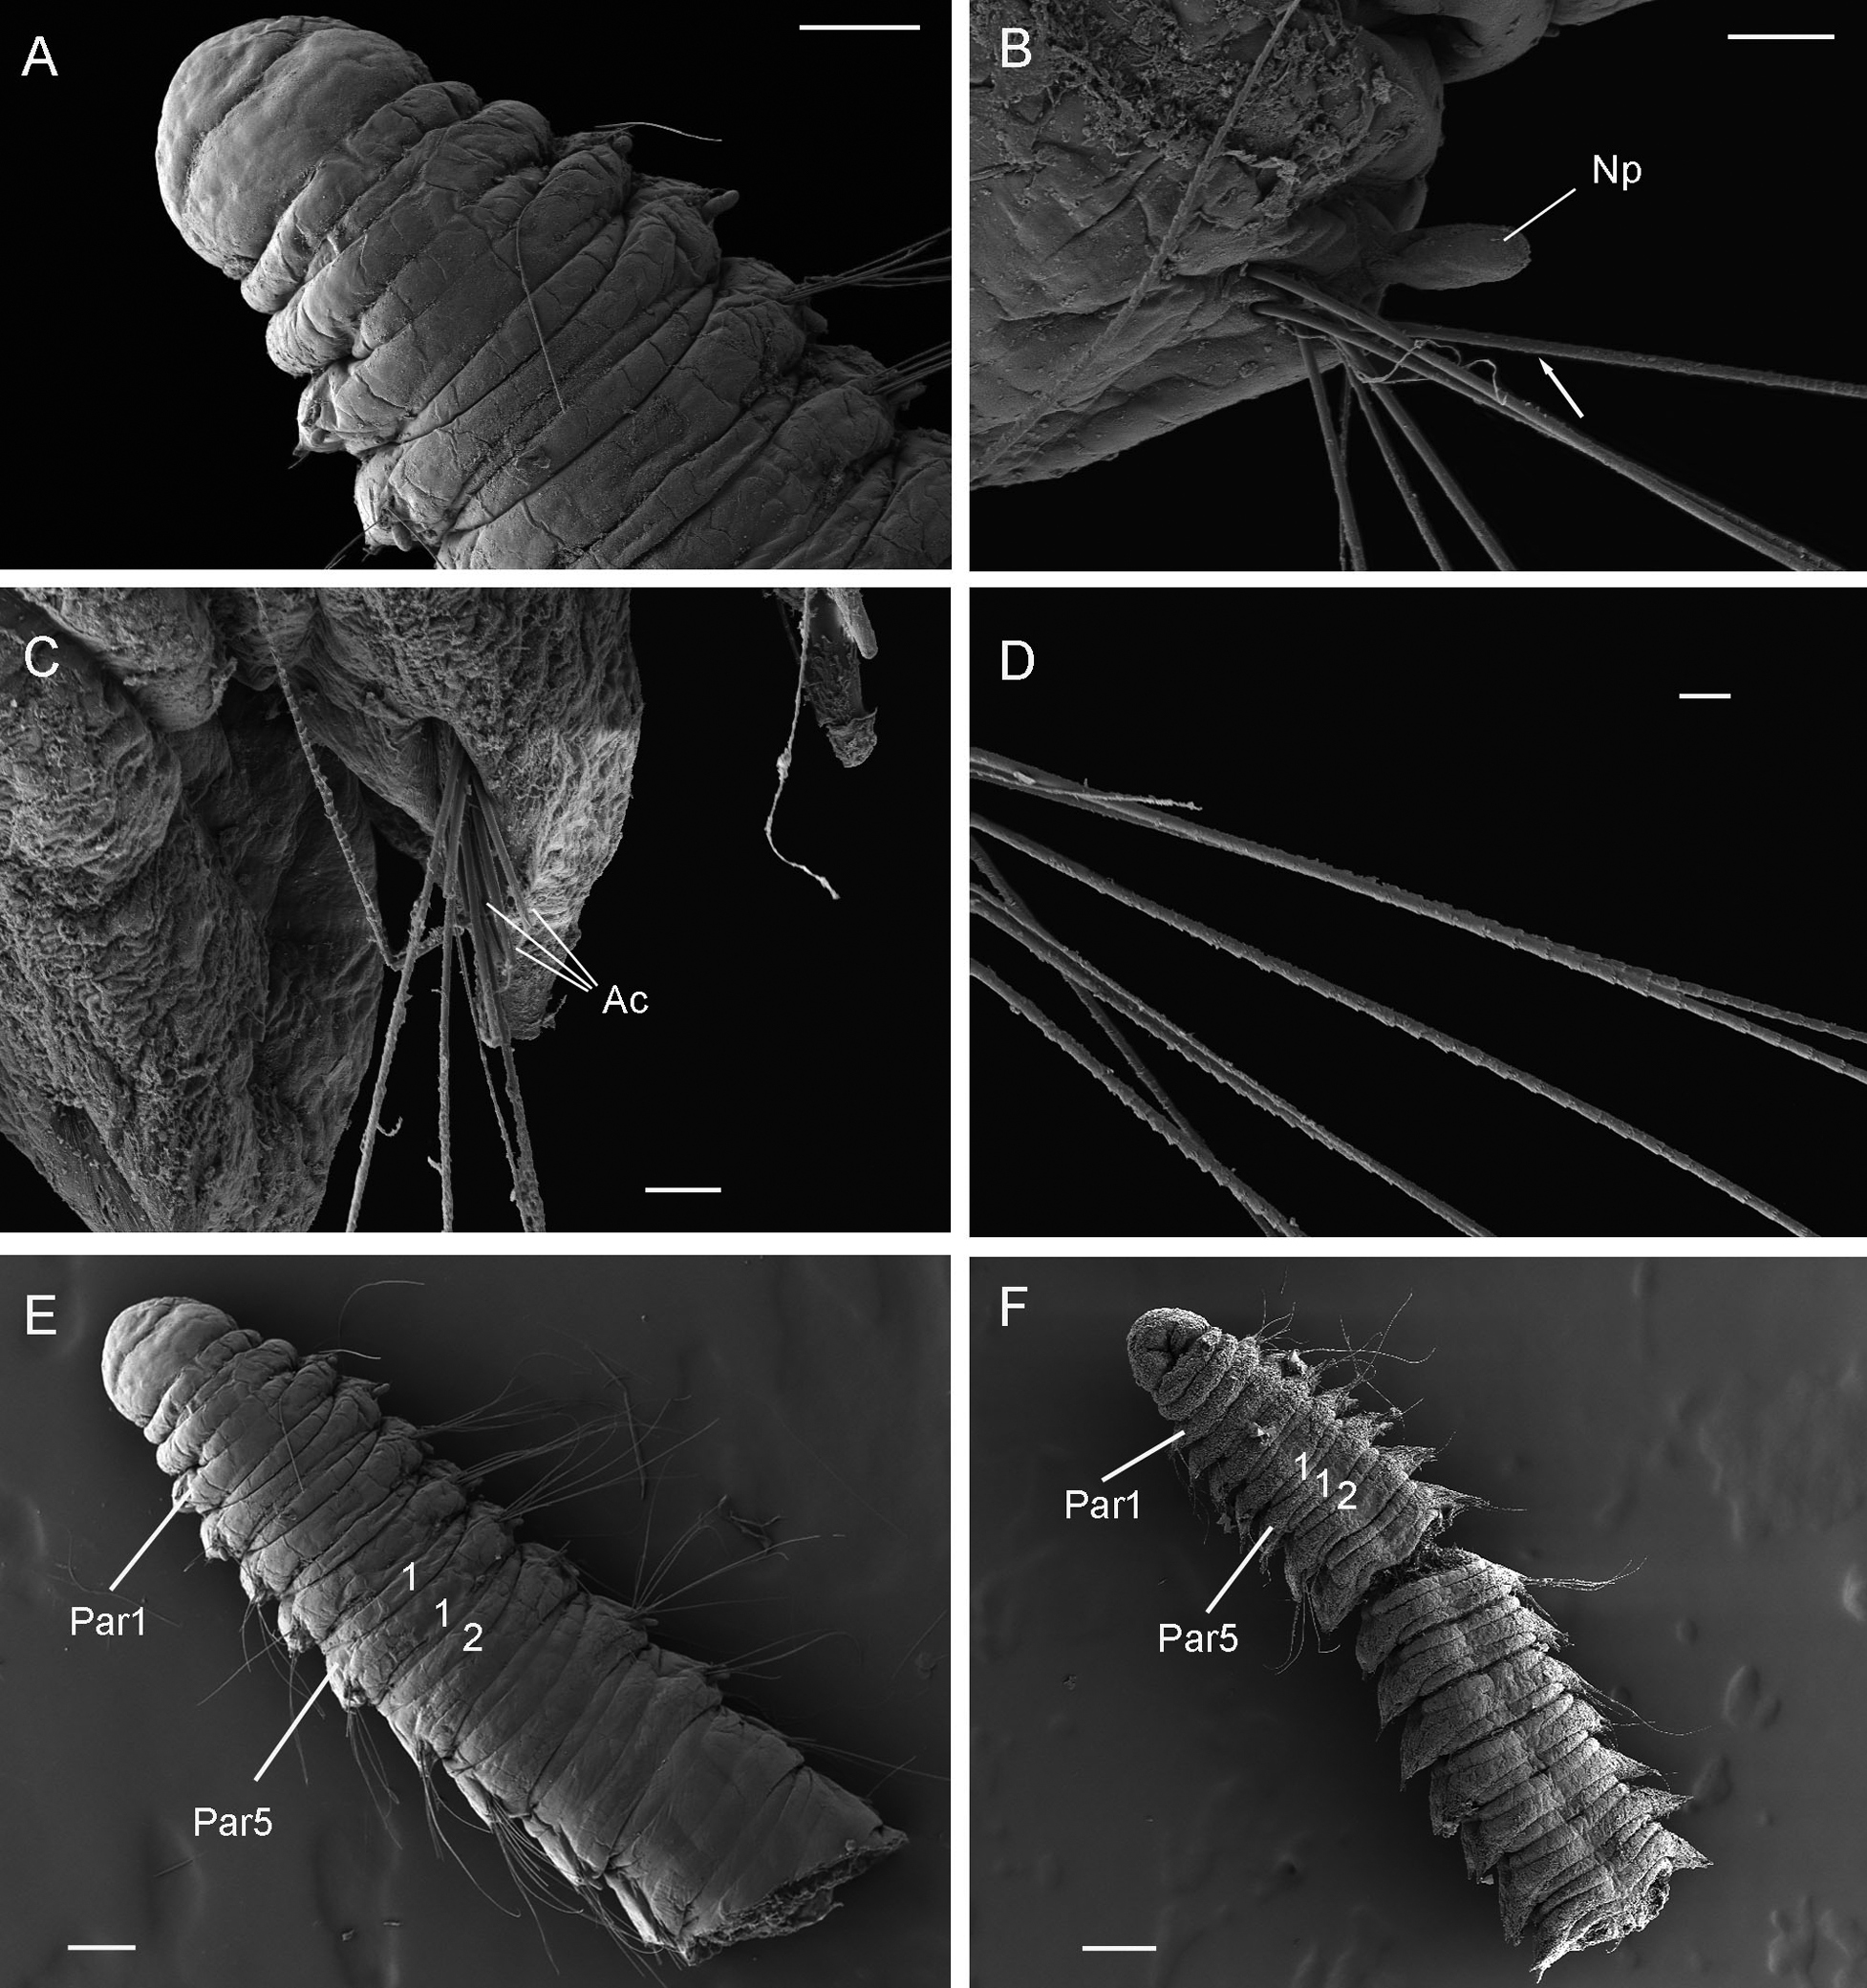 A scientific illustration with B&W SEM images of a small worm